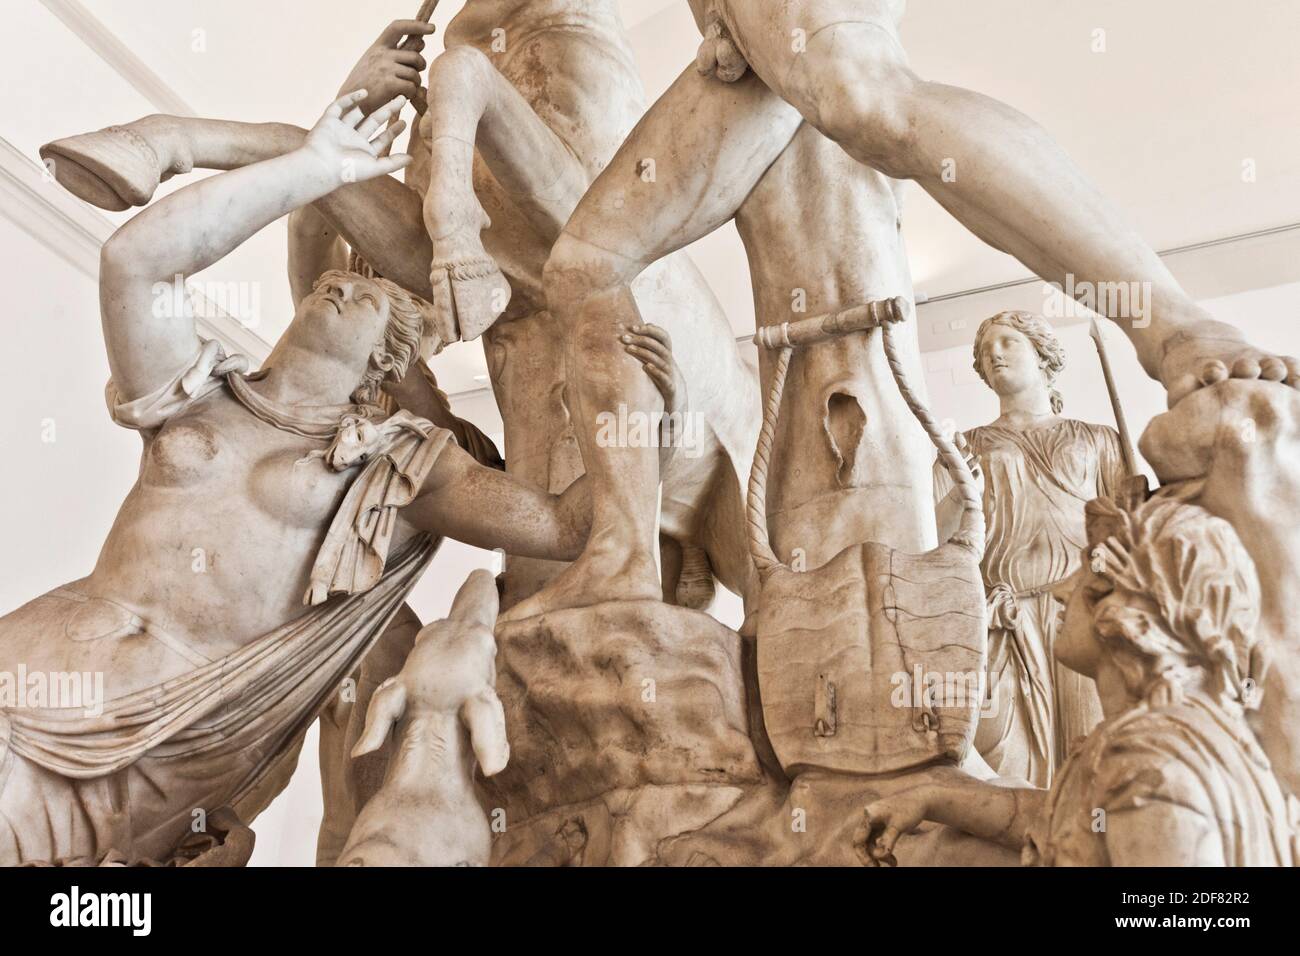 Farnese Bull, Toro Farnese, marble statue, Hellenistic sculpture, National Archaeological Museum of Naples, MANN, Naples city, Campania, Italy, Stock Photo